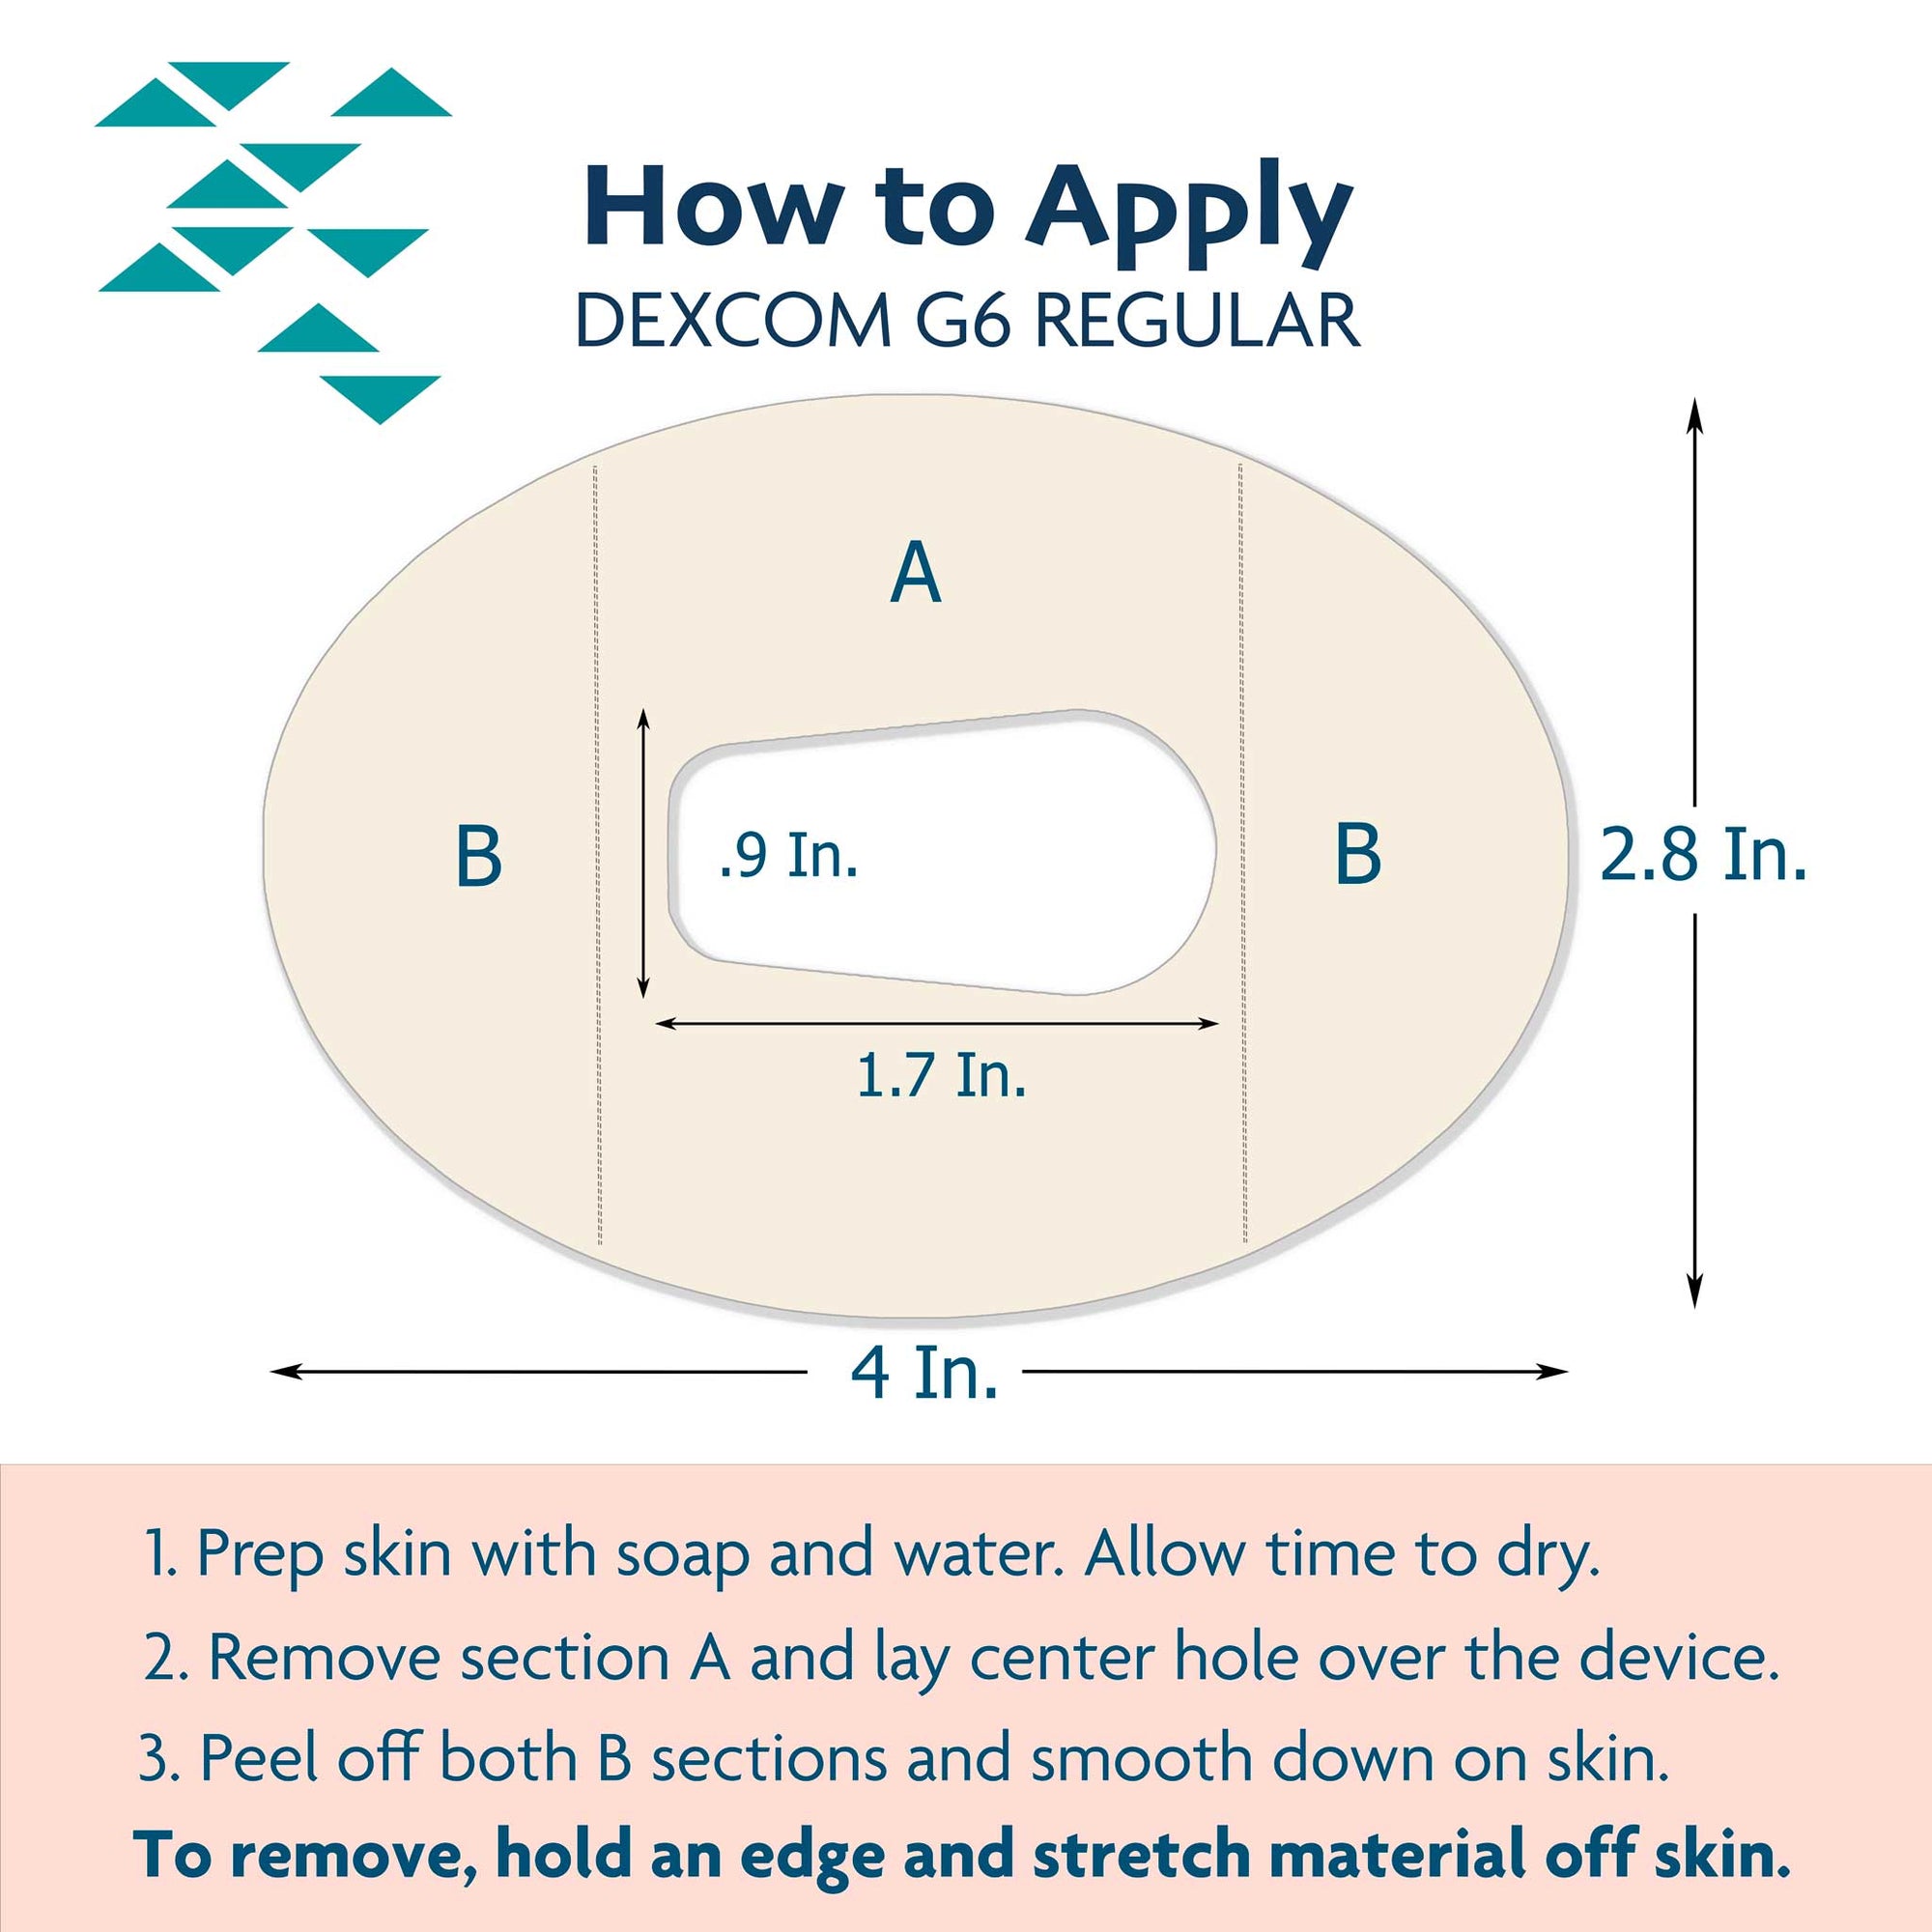 ExpressionMed Instructions for proper application of dexcom G6 tapes